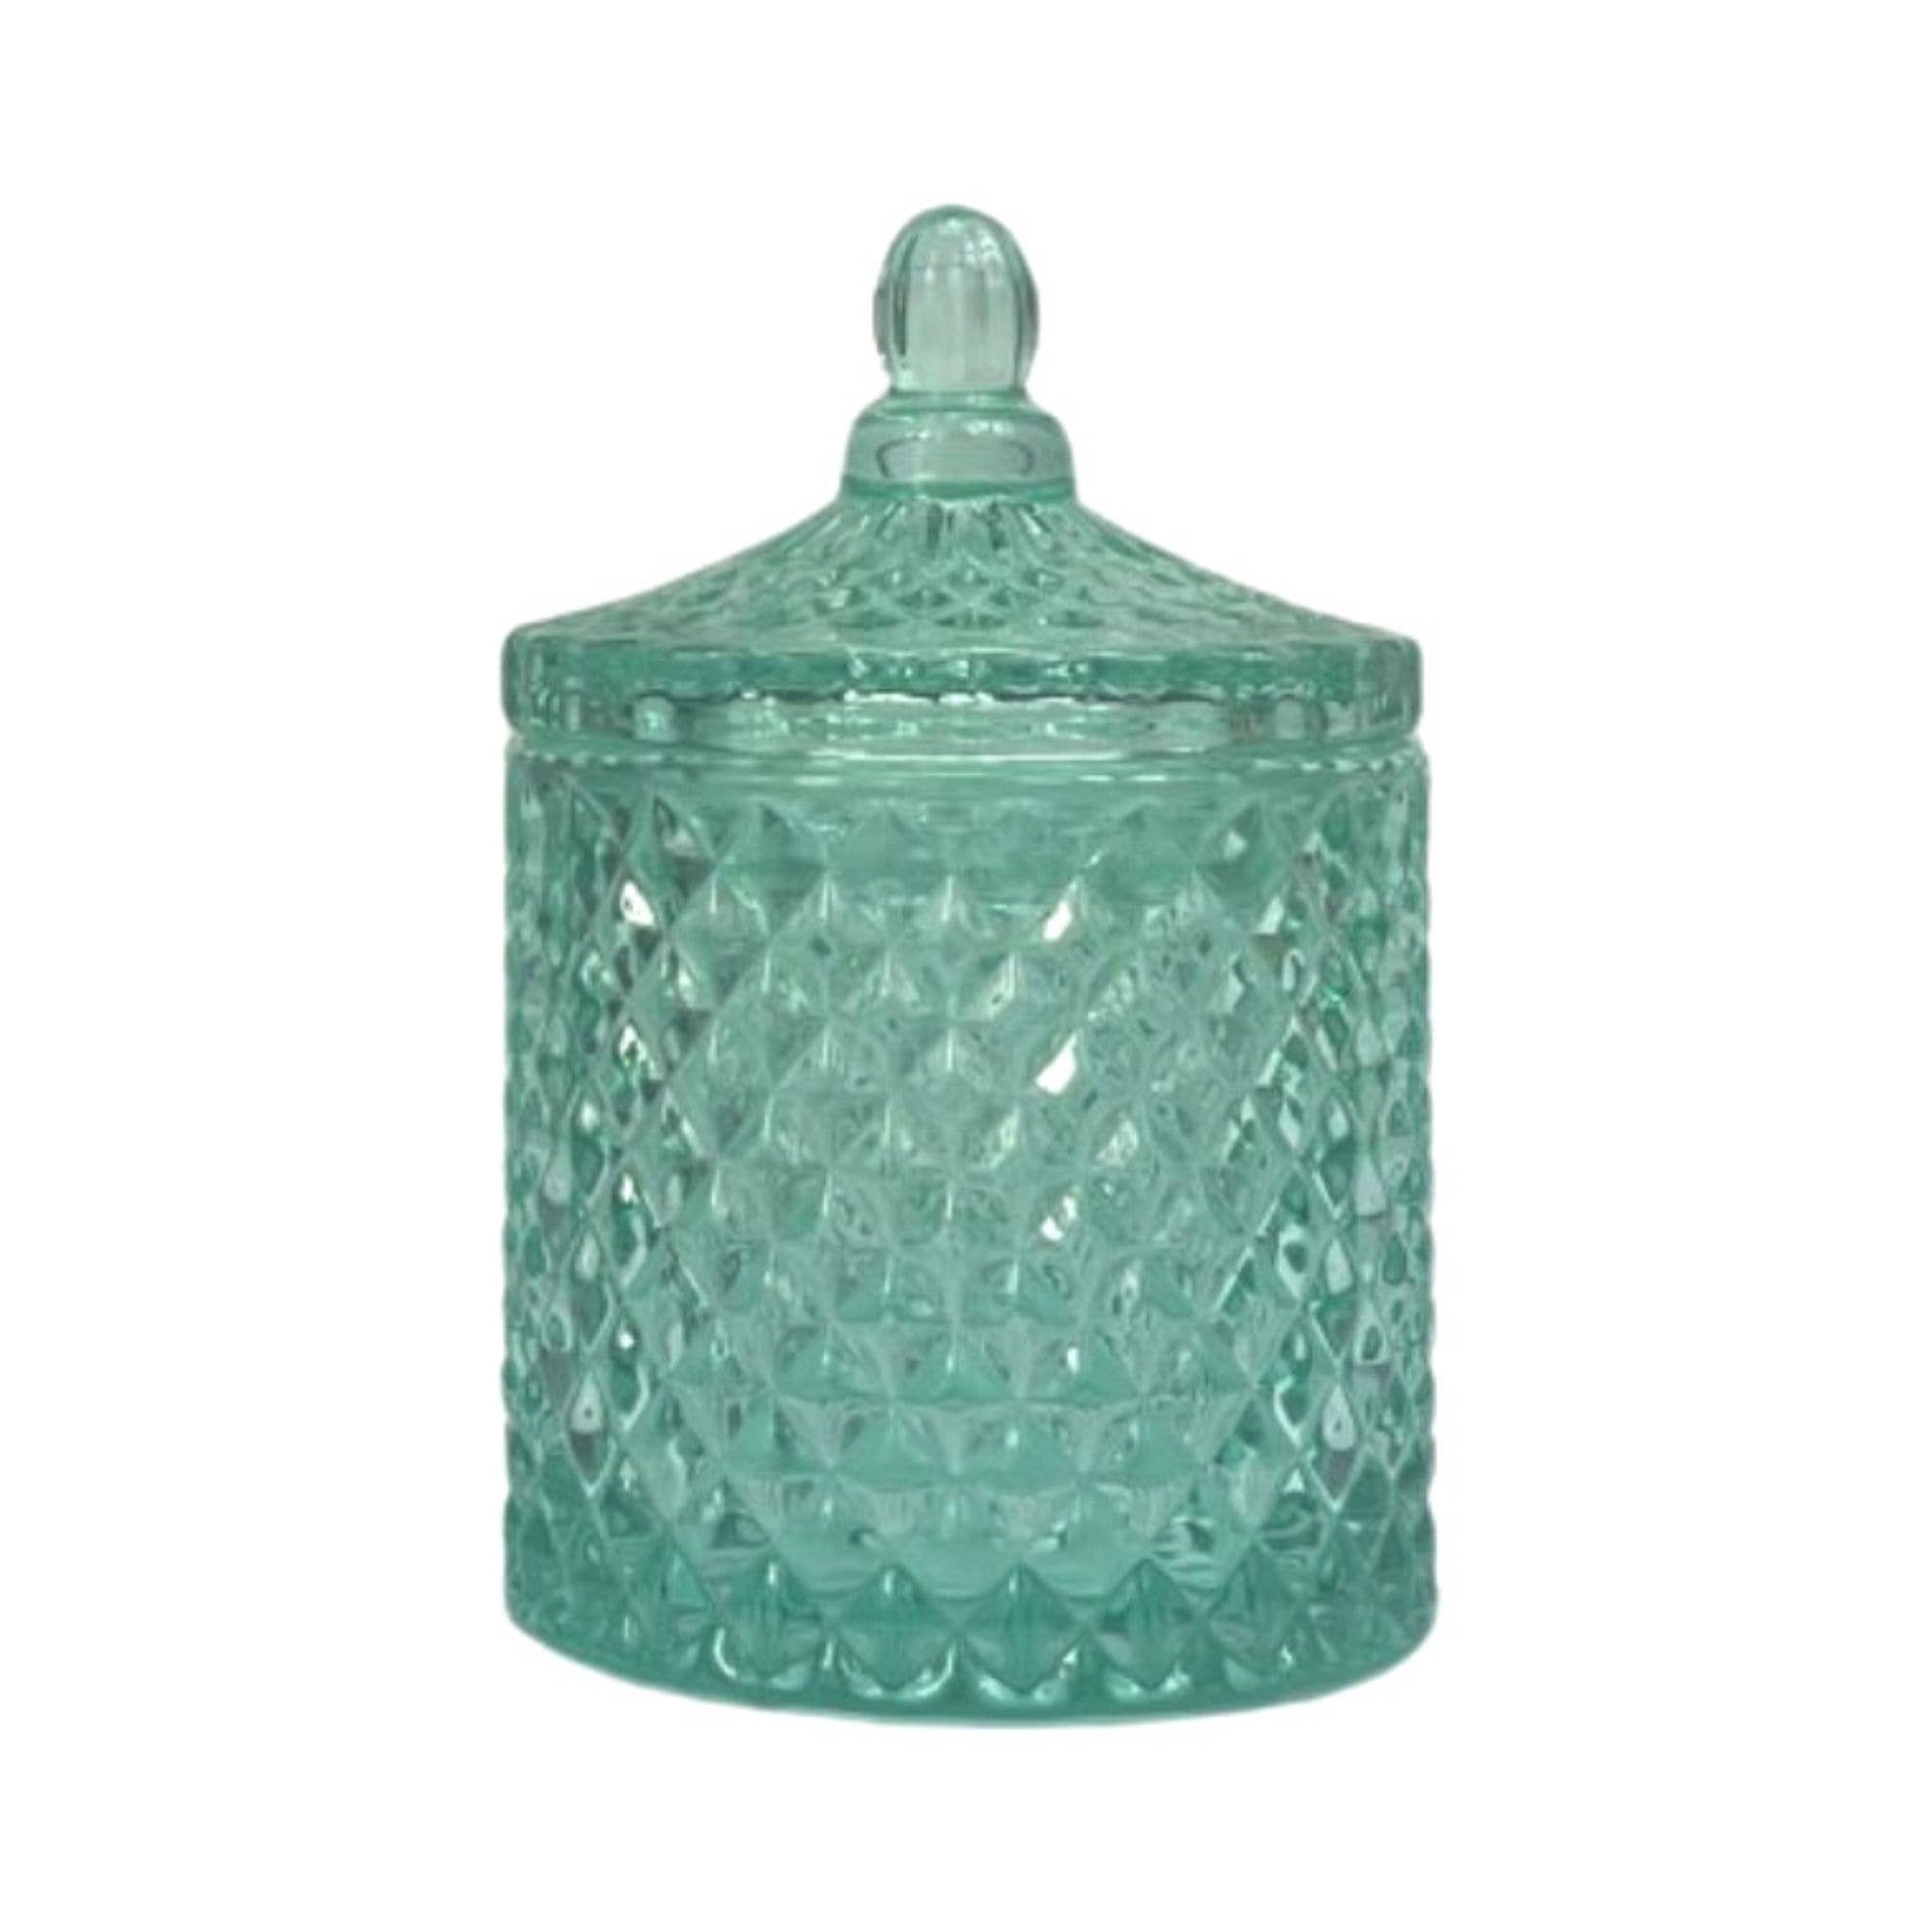 Cosmetic Glass Canister - Turquoise de France or French Lavender